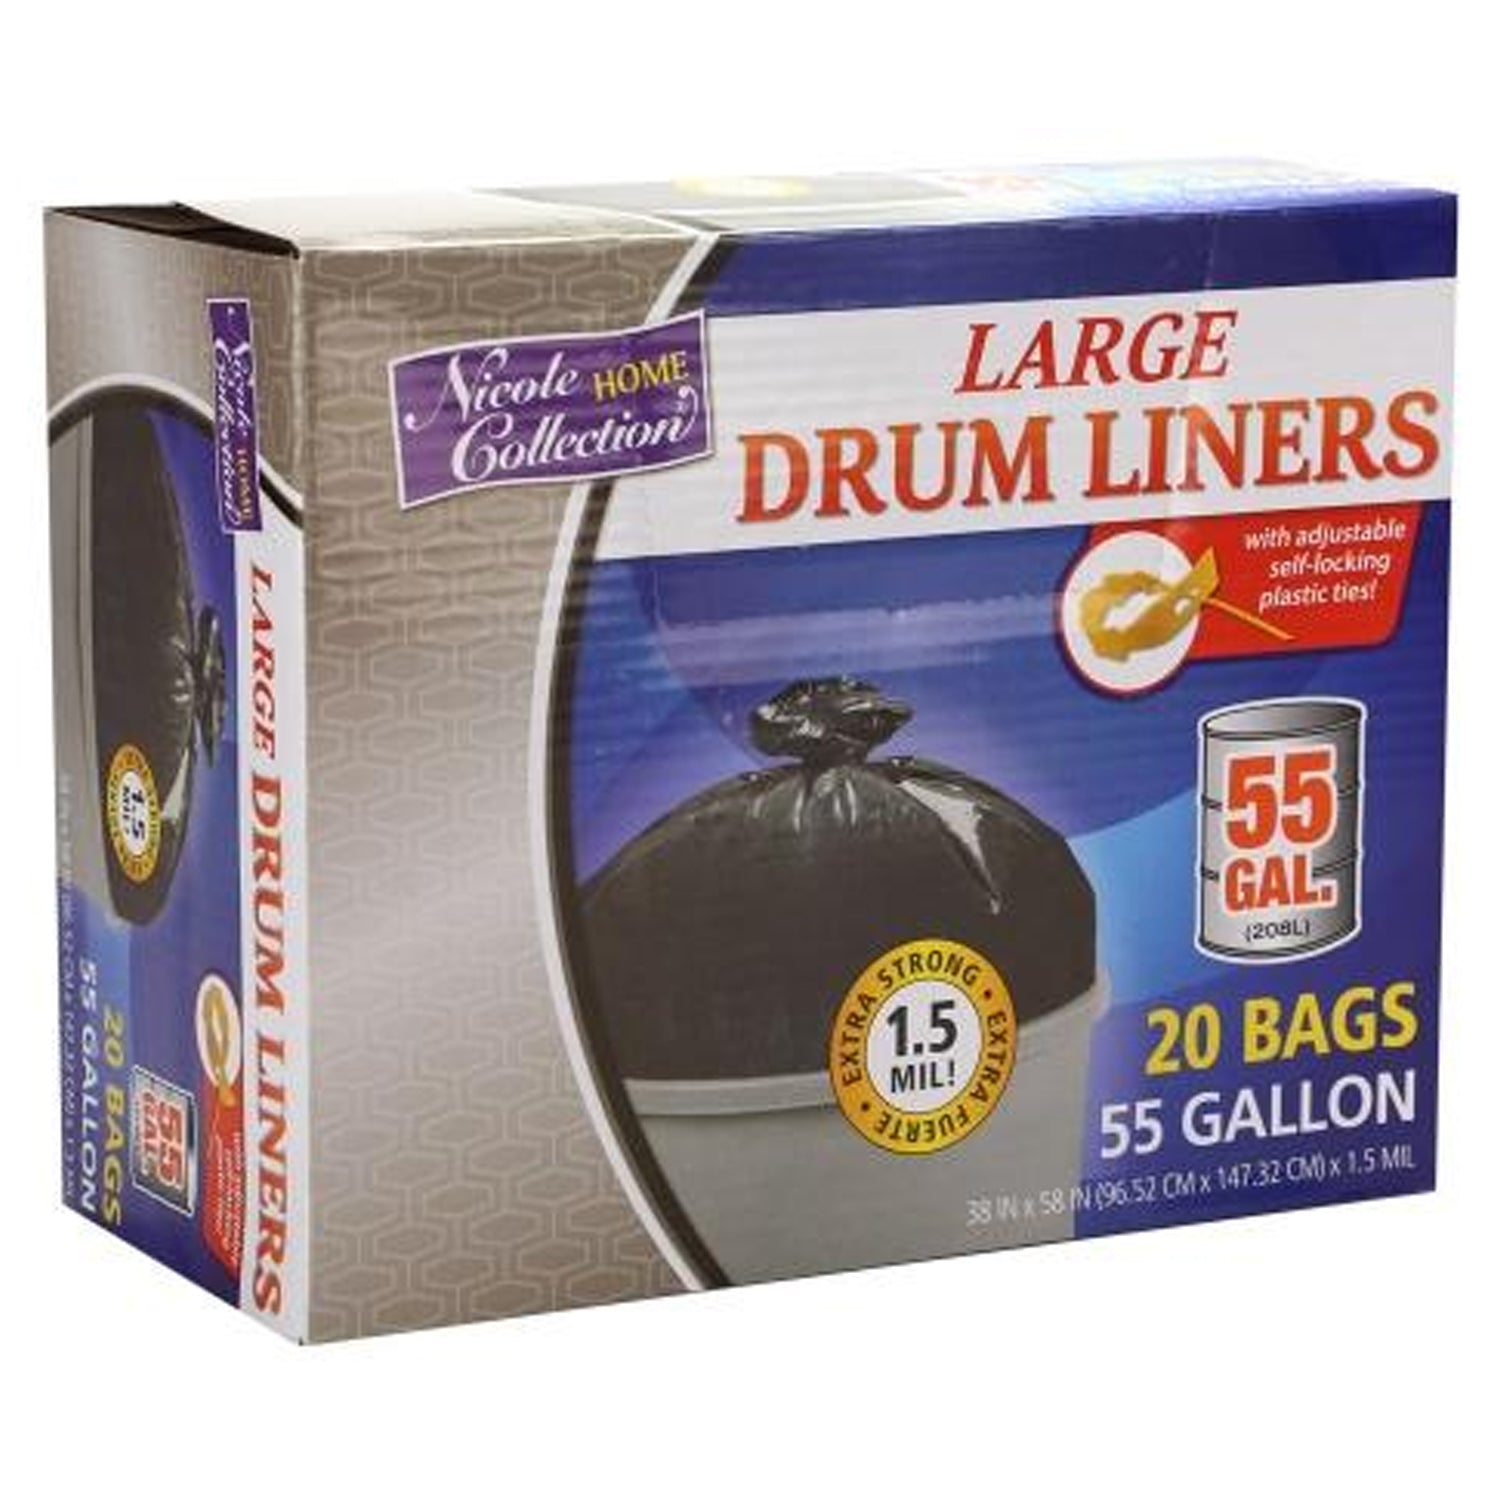 Nicole Home Collection Gallon Black Plastic Drum Liners 55 GAL Garbage Bags Nicole Collection   